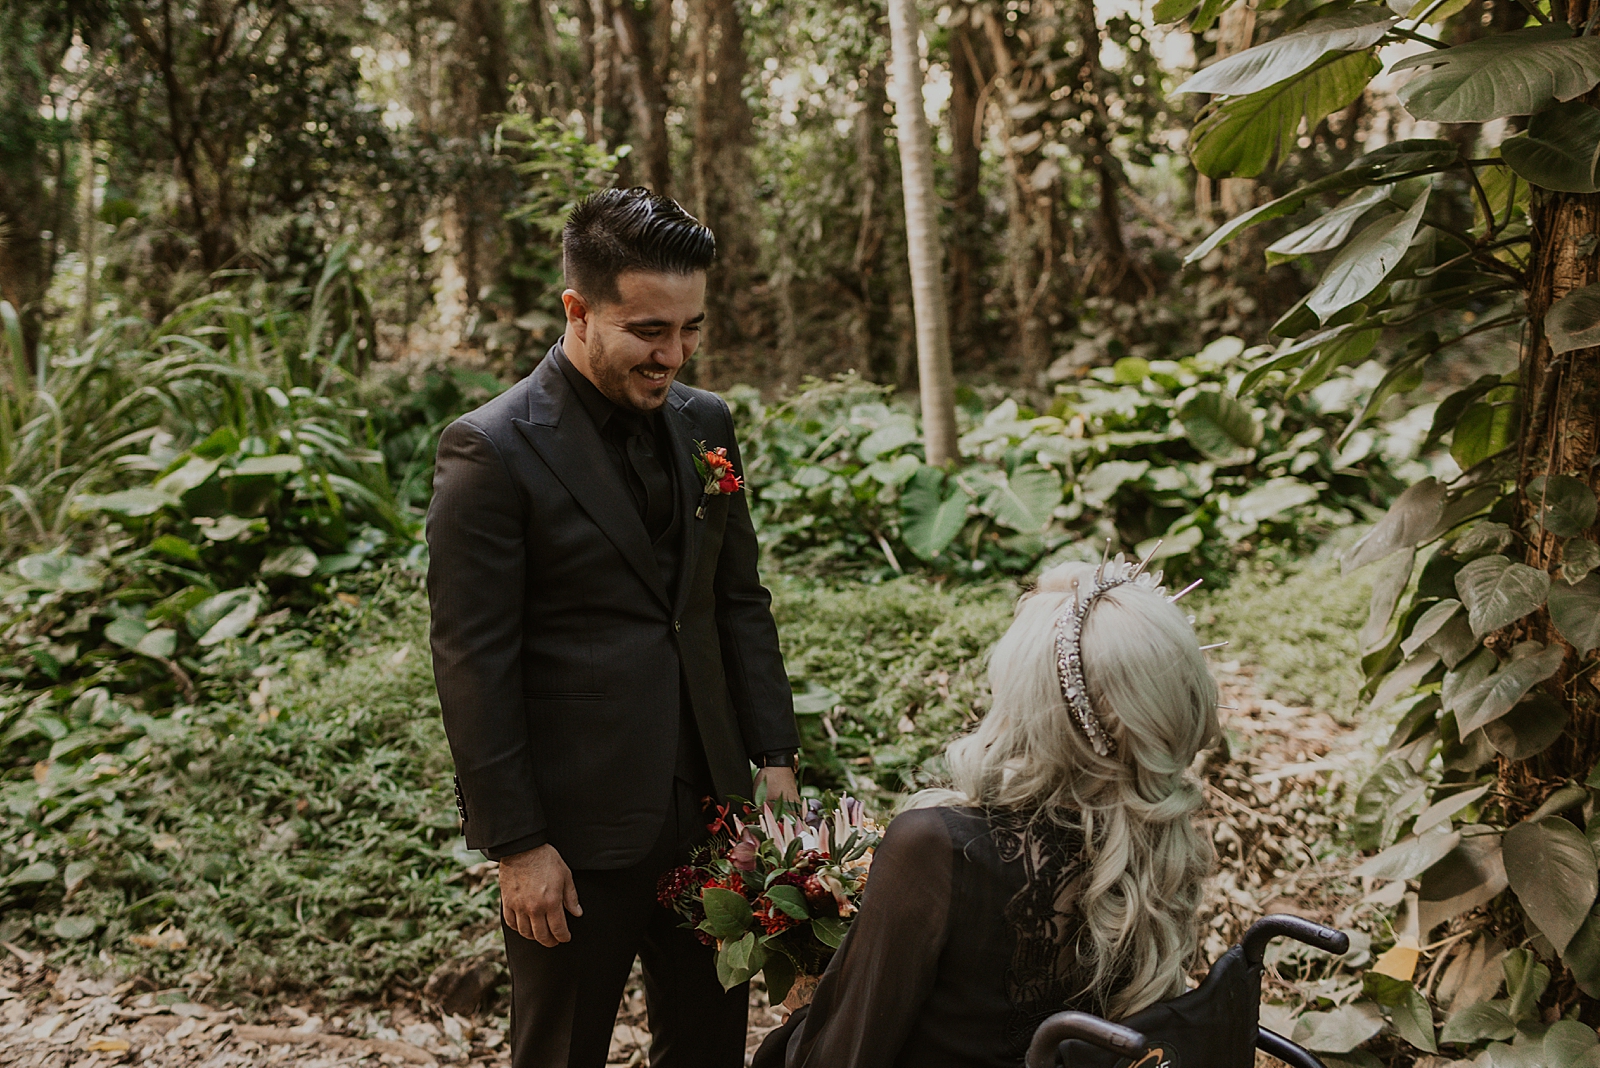 Groom's reaction to seeing Bride with bouquet in wheel chair in tropical forrest